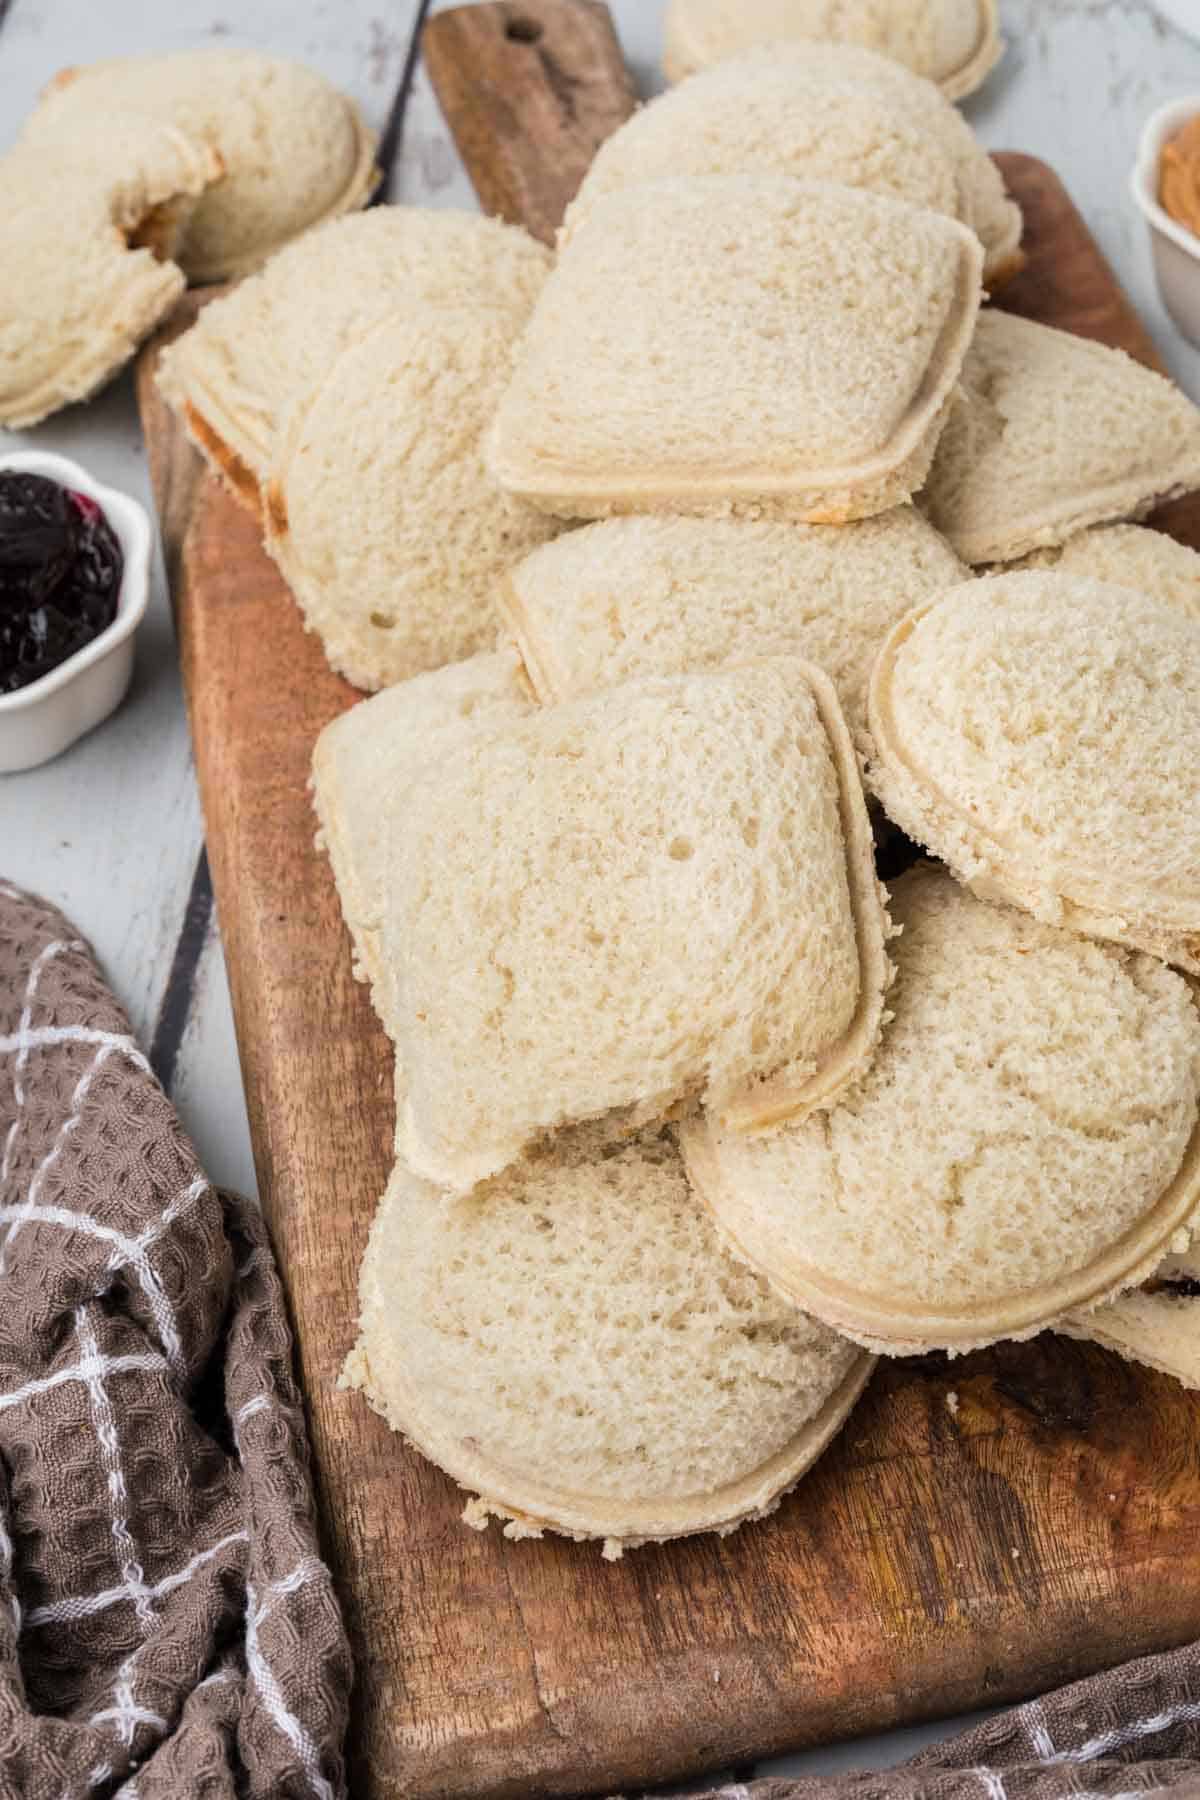 A wooden board is piled with several pieces of crustless, square, and round sandwich bread. A bowl of dark jam and a partially visible bowl of peanut butter suggest the beginning stages of homemade uncrustables. A brown hand towel with a plaid pattern is draped on the left side of the board.